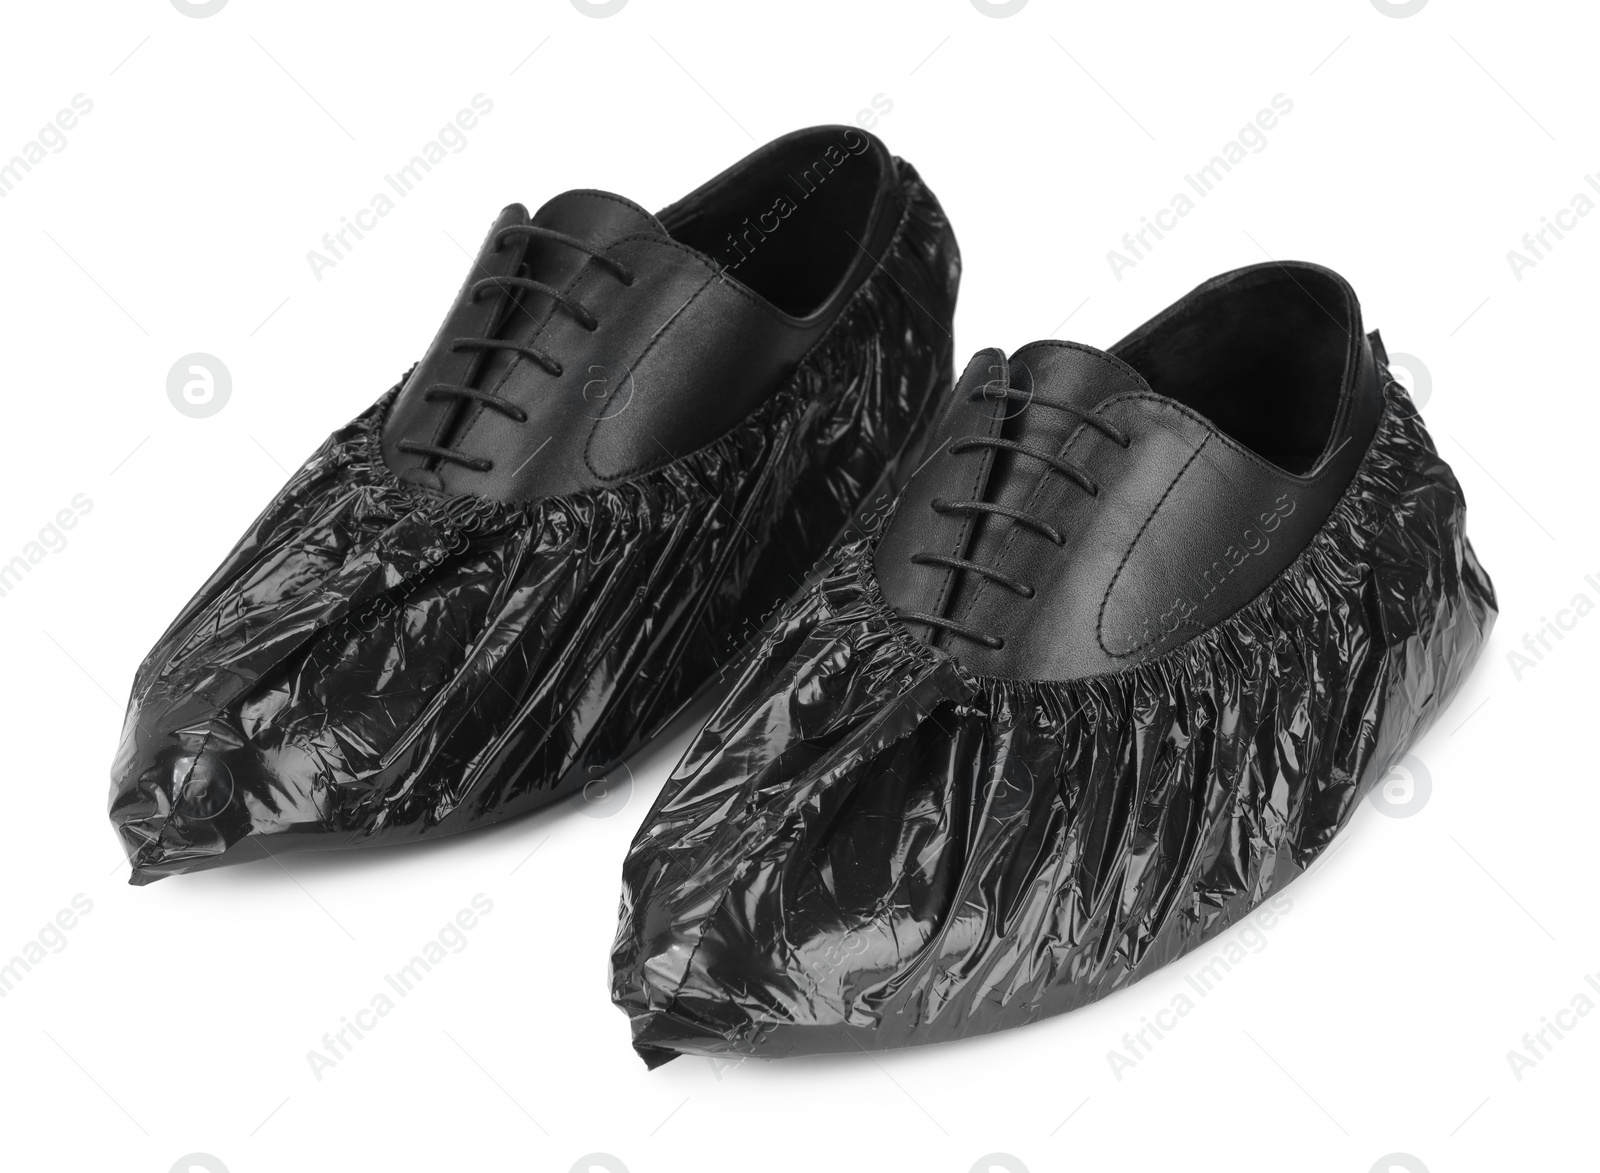 Photo of Men's shoes in black shoe covers isolated on white